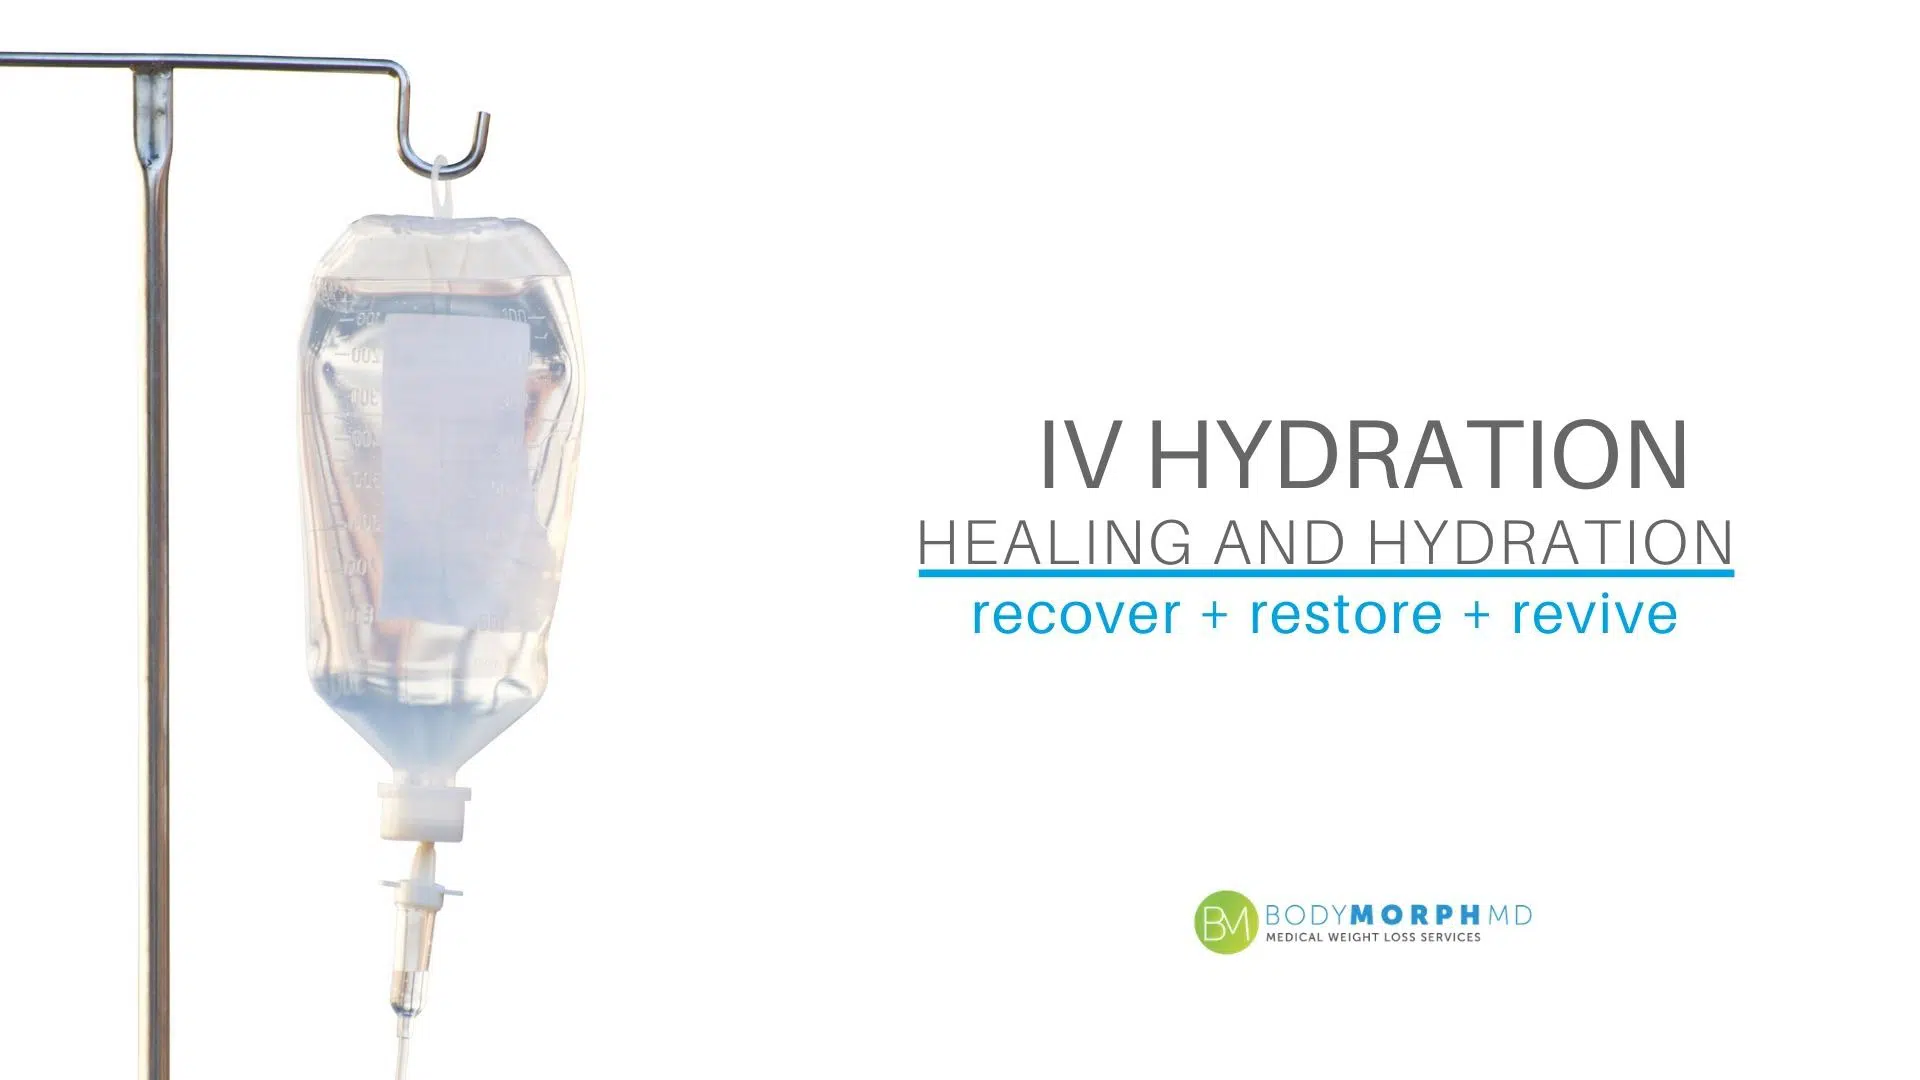 IV healing and hydrating drips available at Body Morph MD.